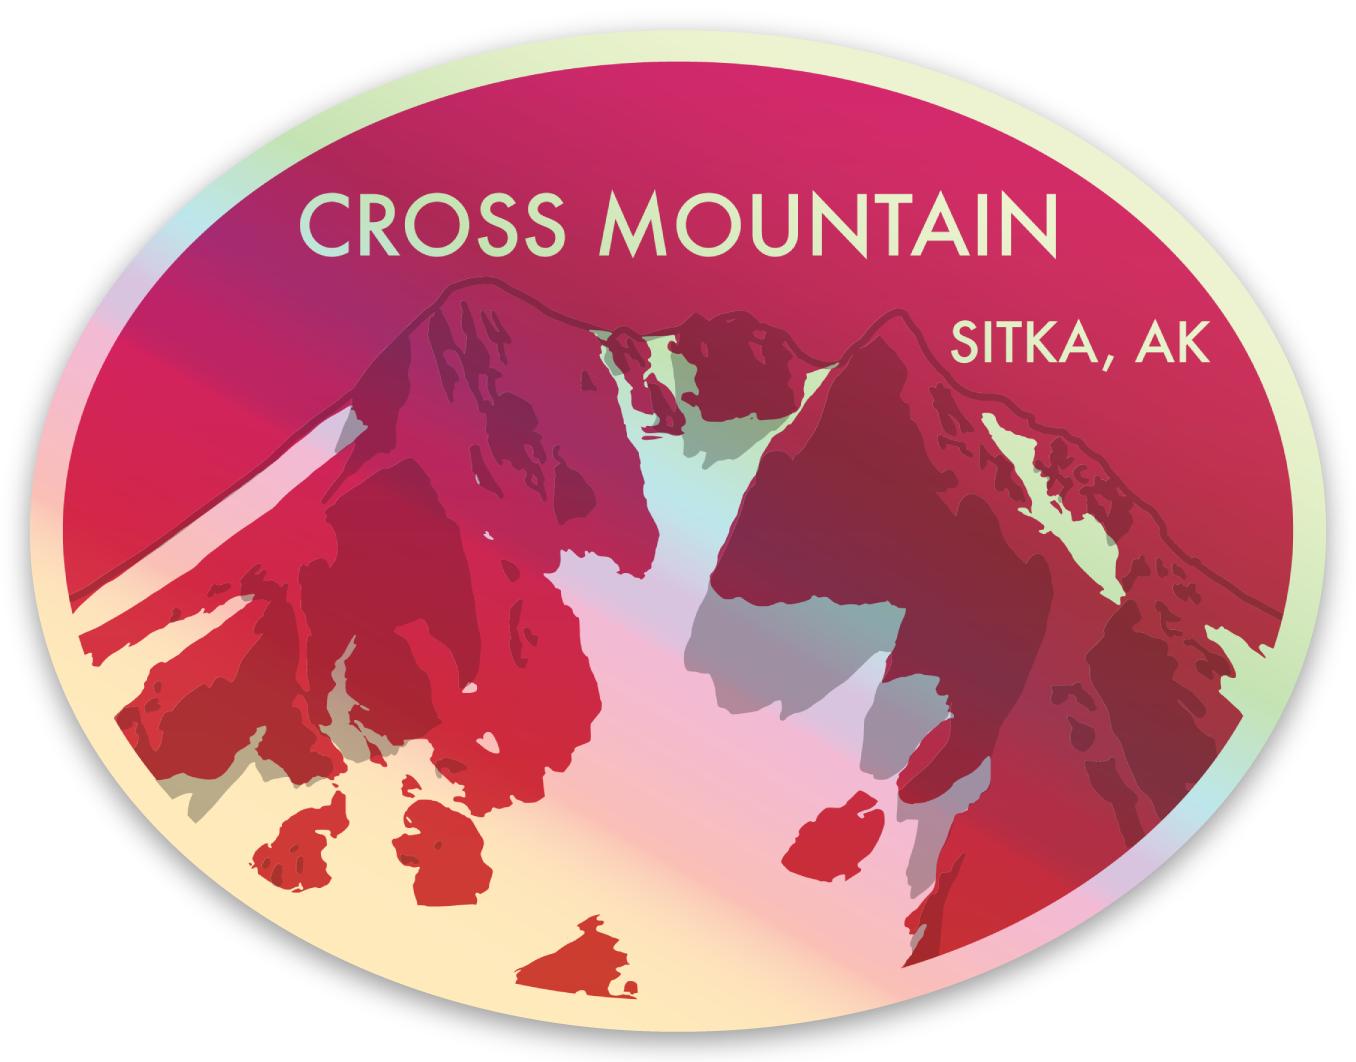 a quote unquote holographic
sticker of cross mountain aka cupola peak, it’s reddish pink and shiny reflective